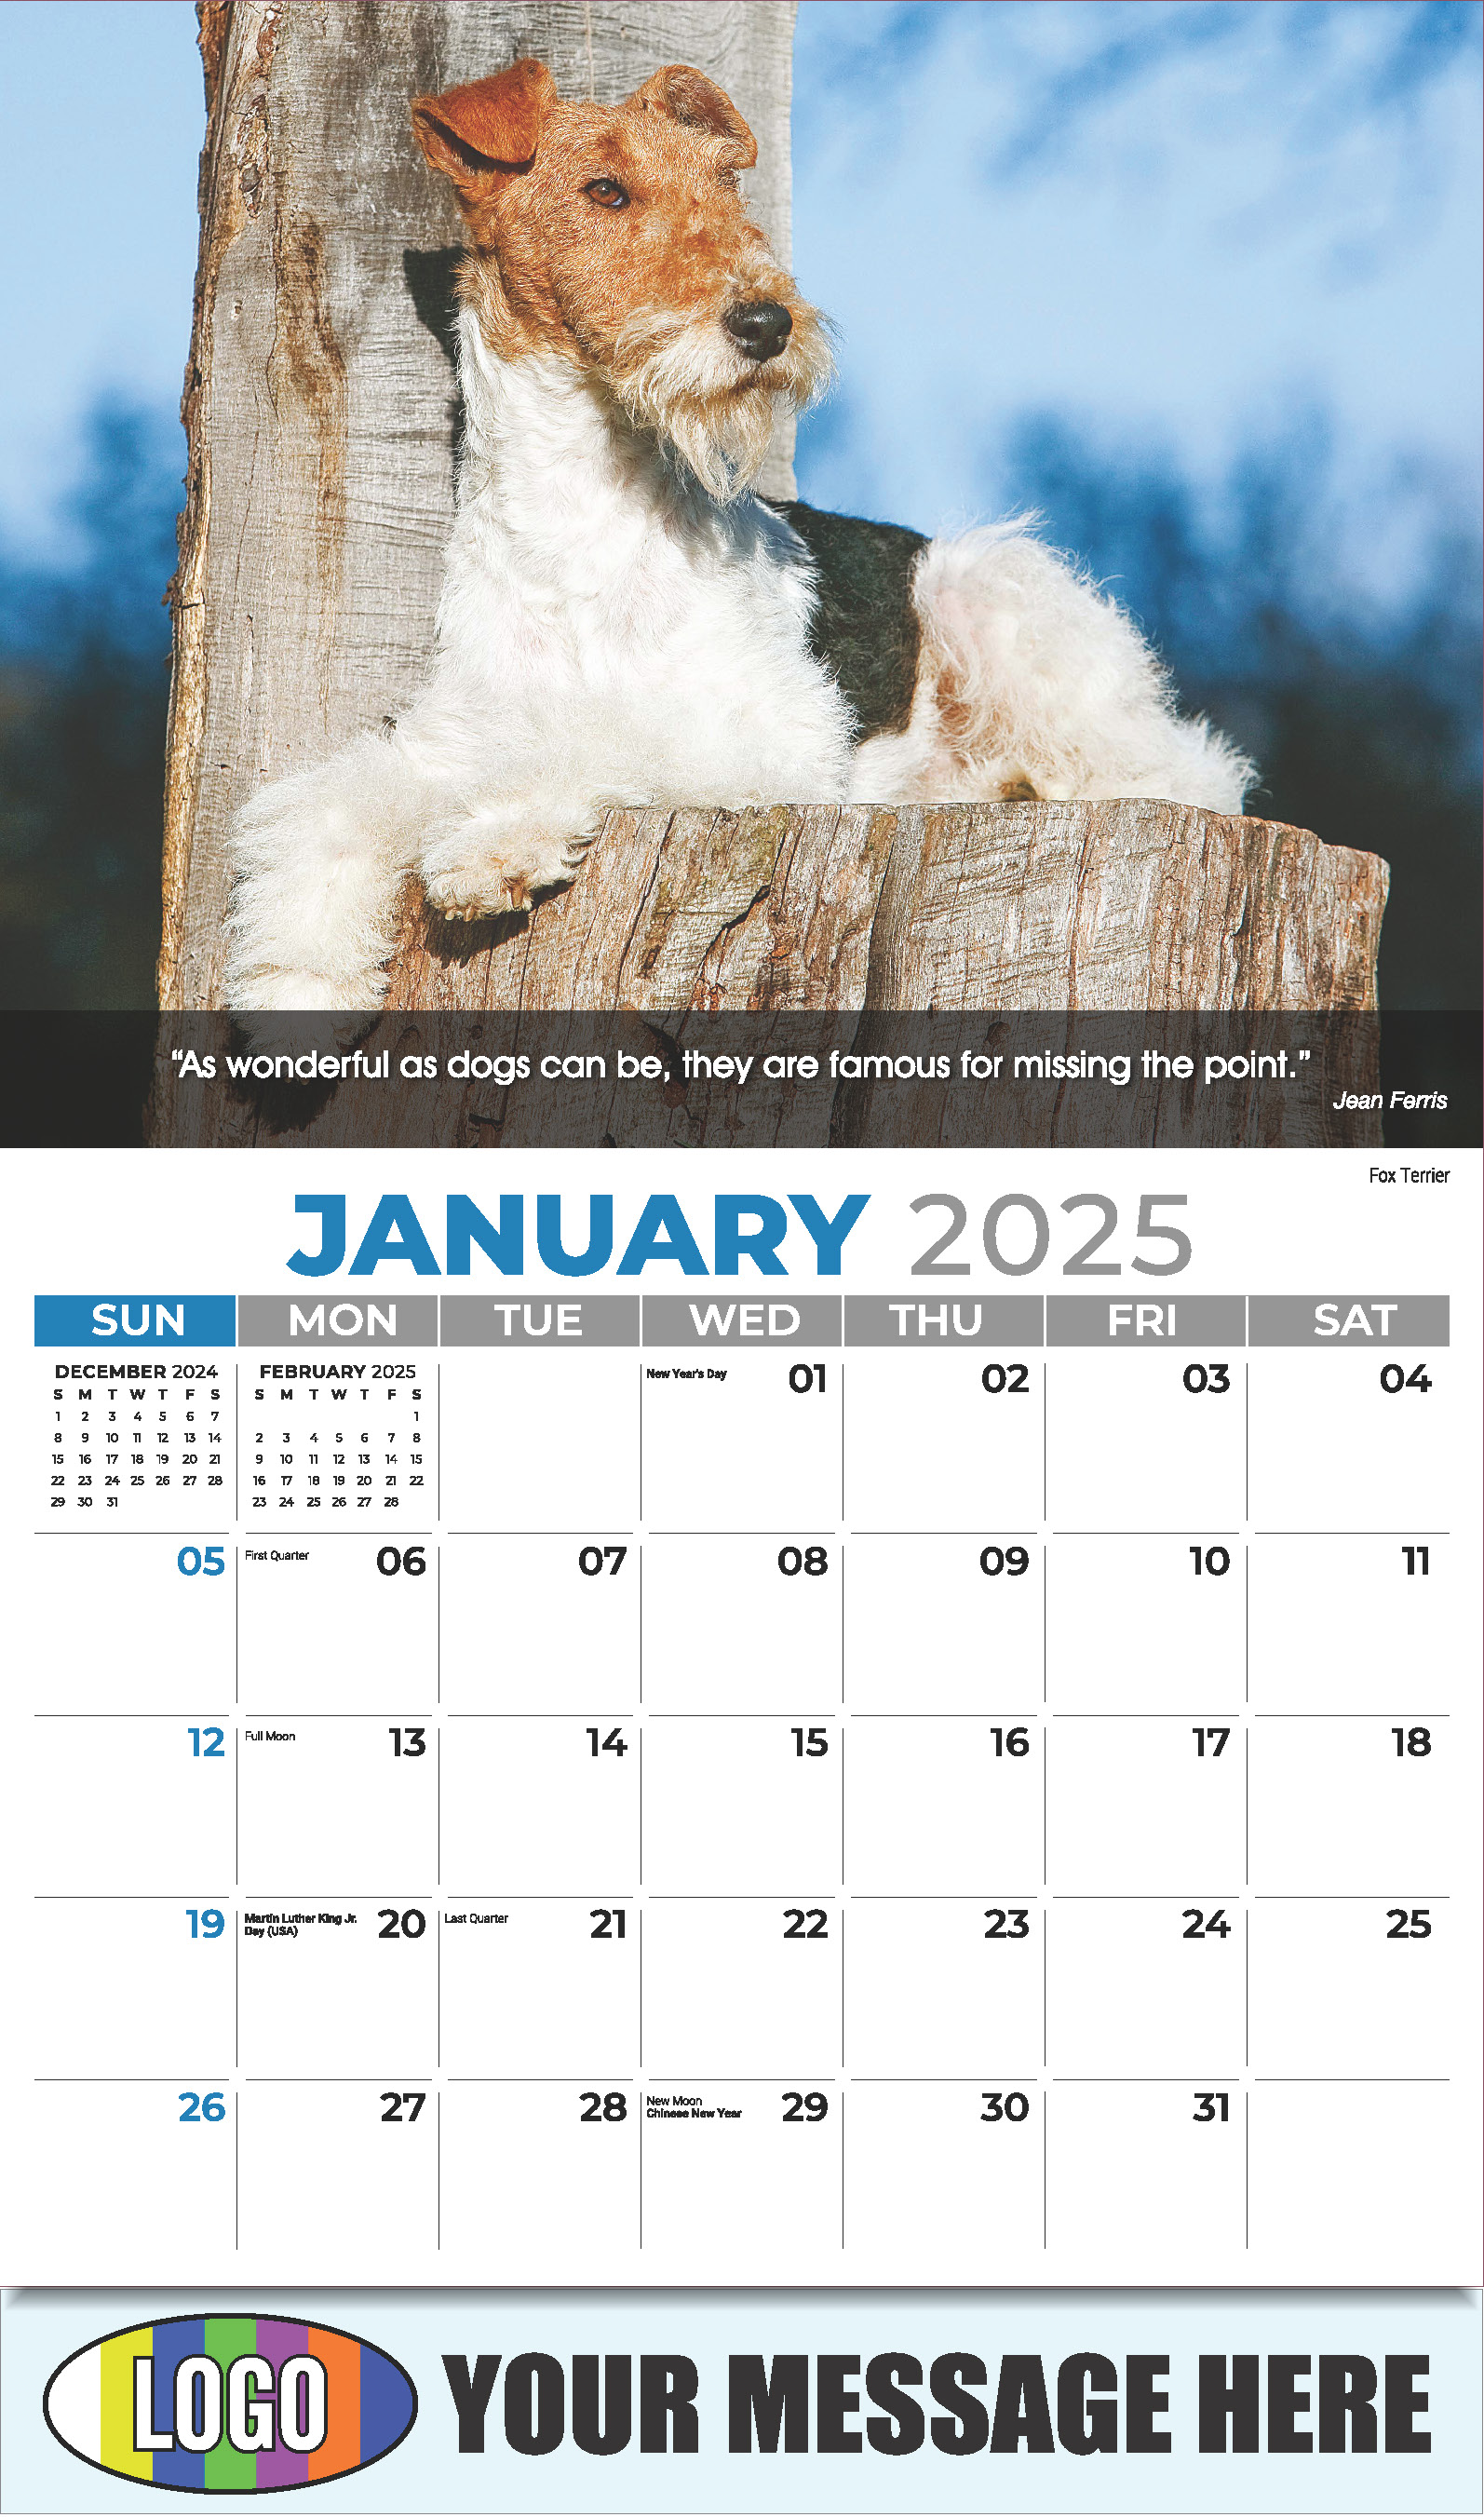 Dogs 2025 Vets and Pets Business Promotion Calendar - January